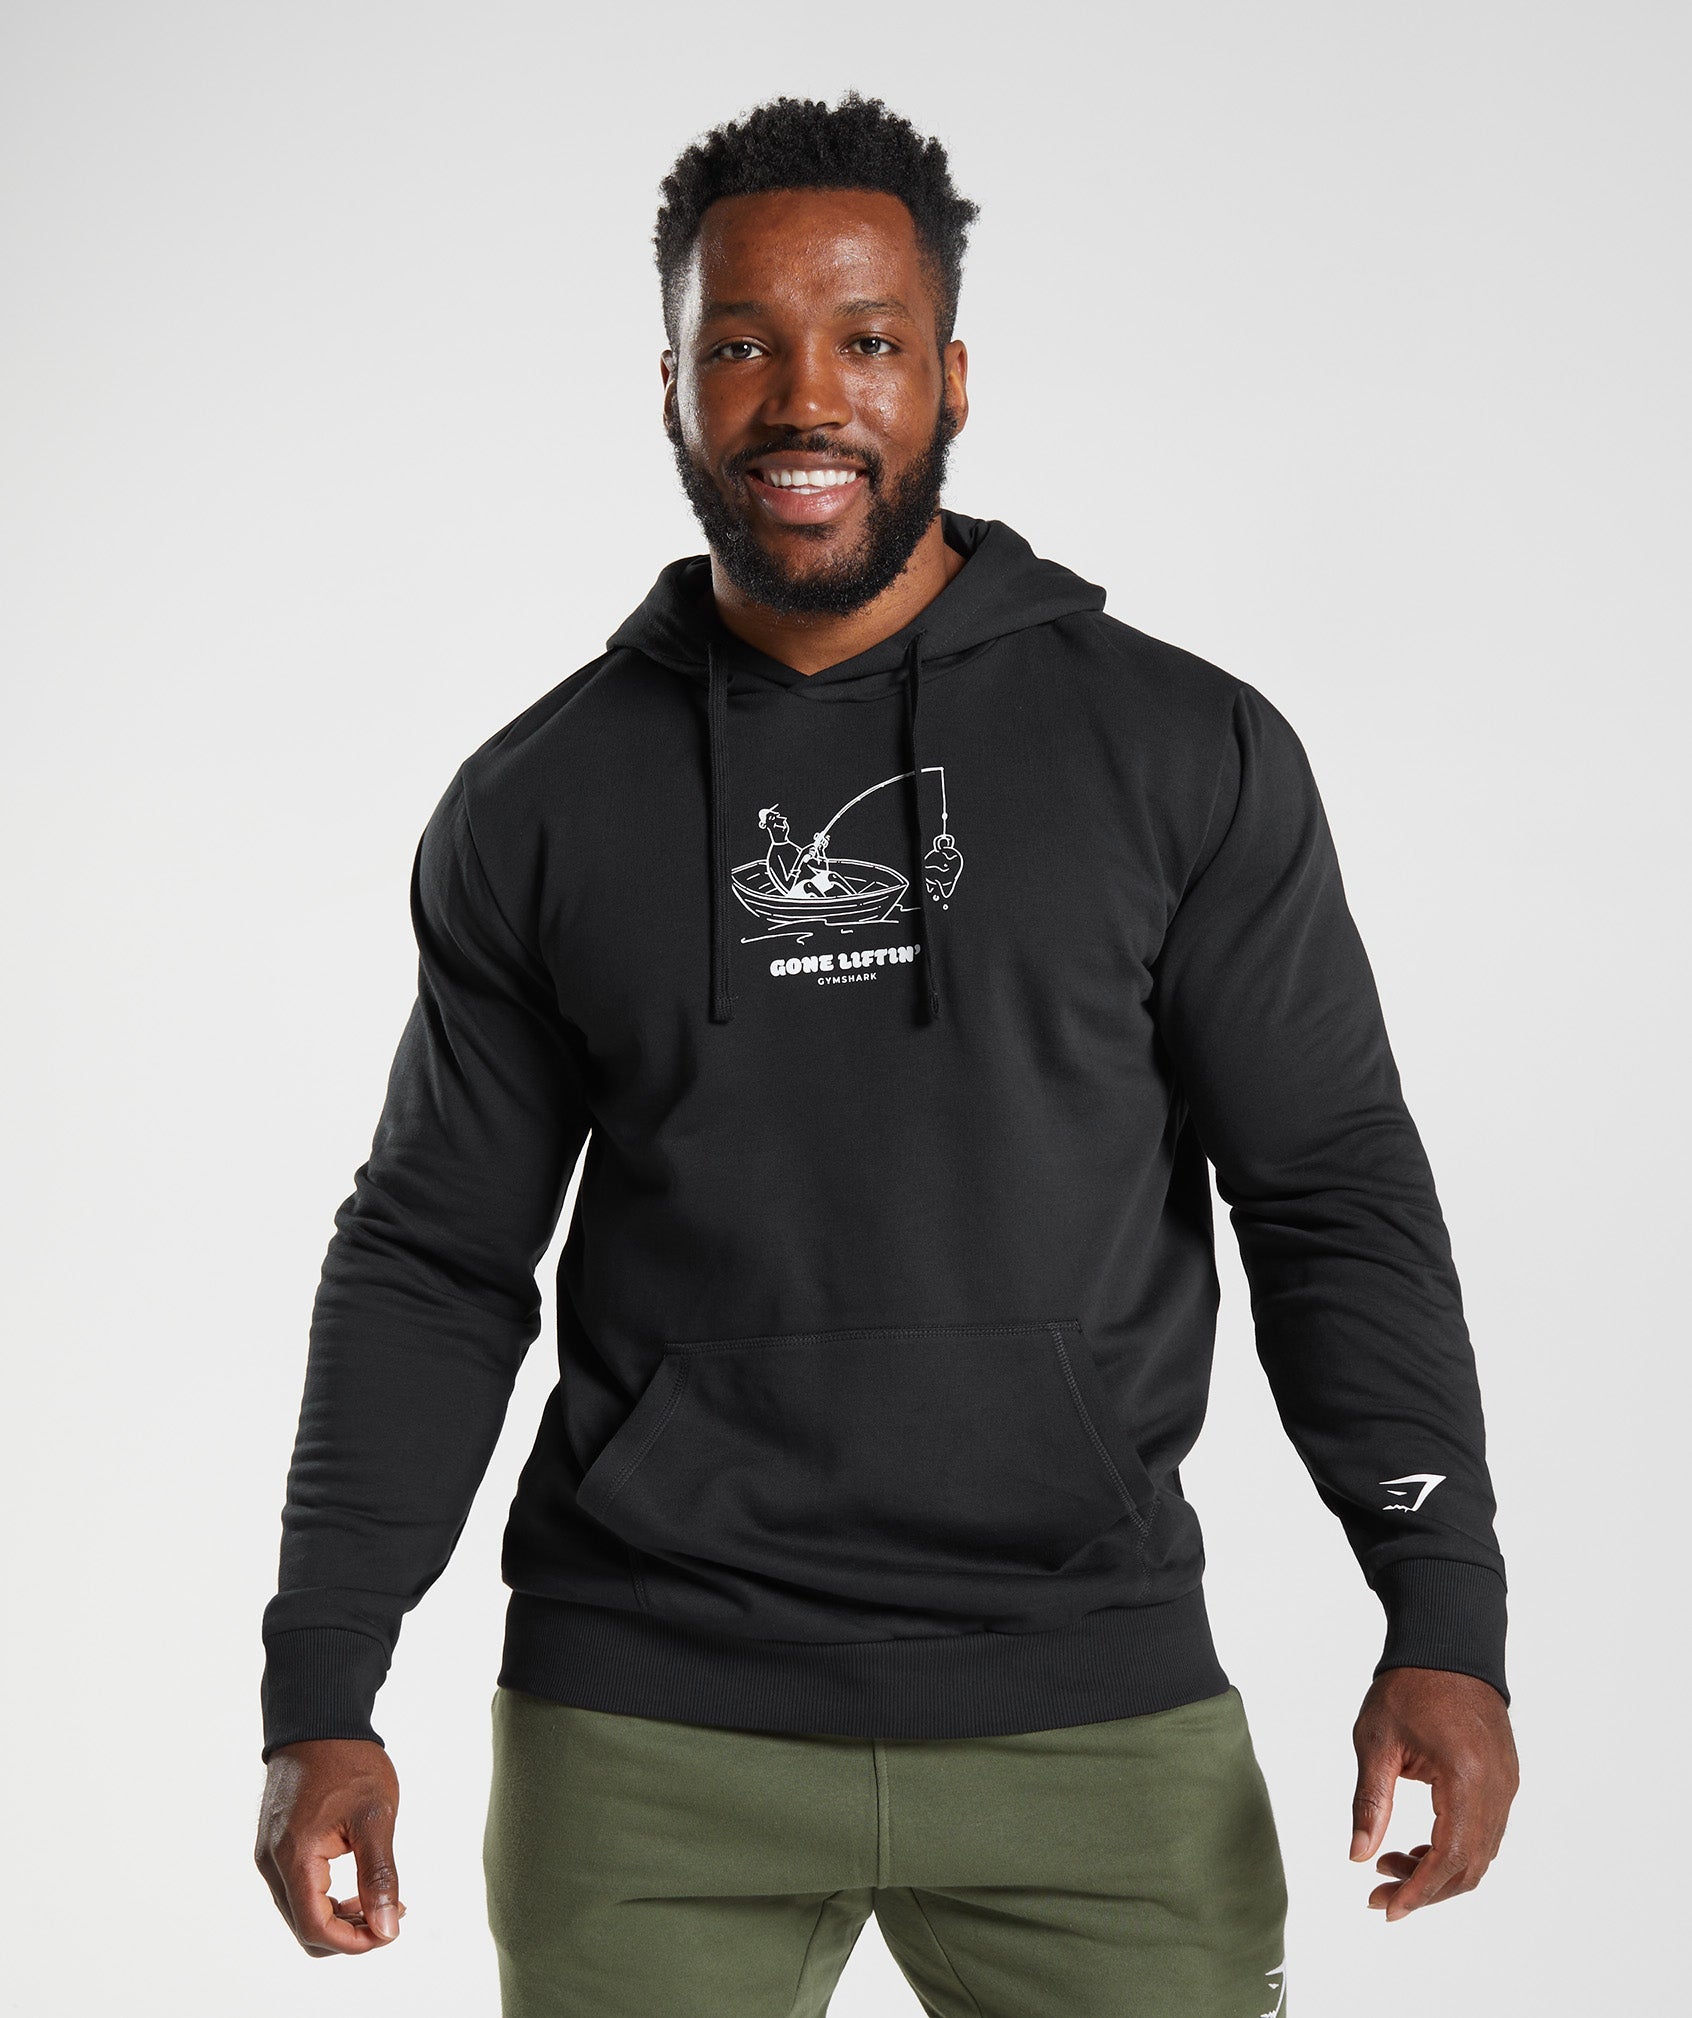 Gone Liftin' Graphic Hoodie in Black - view 1